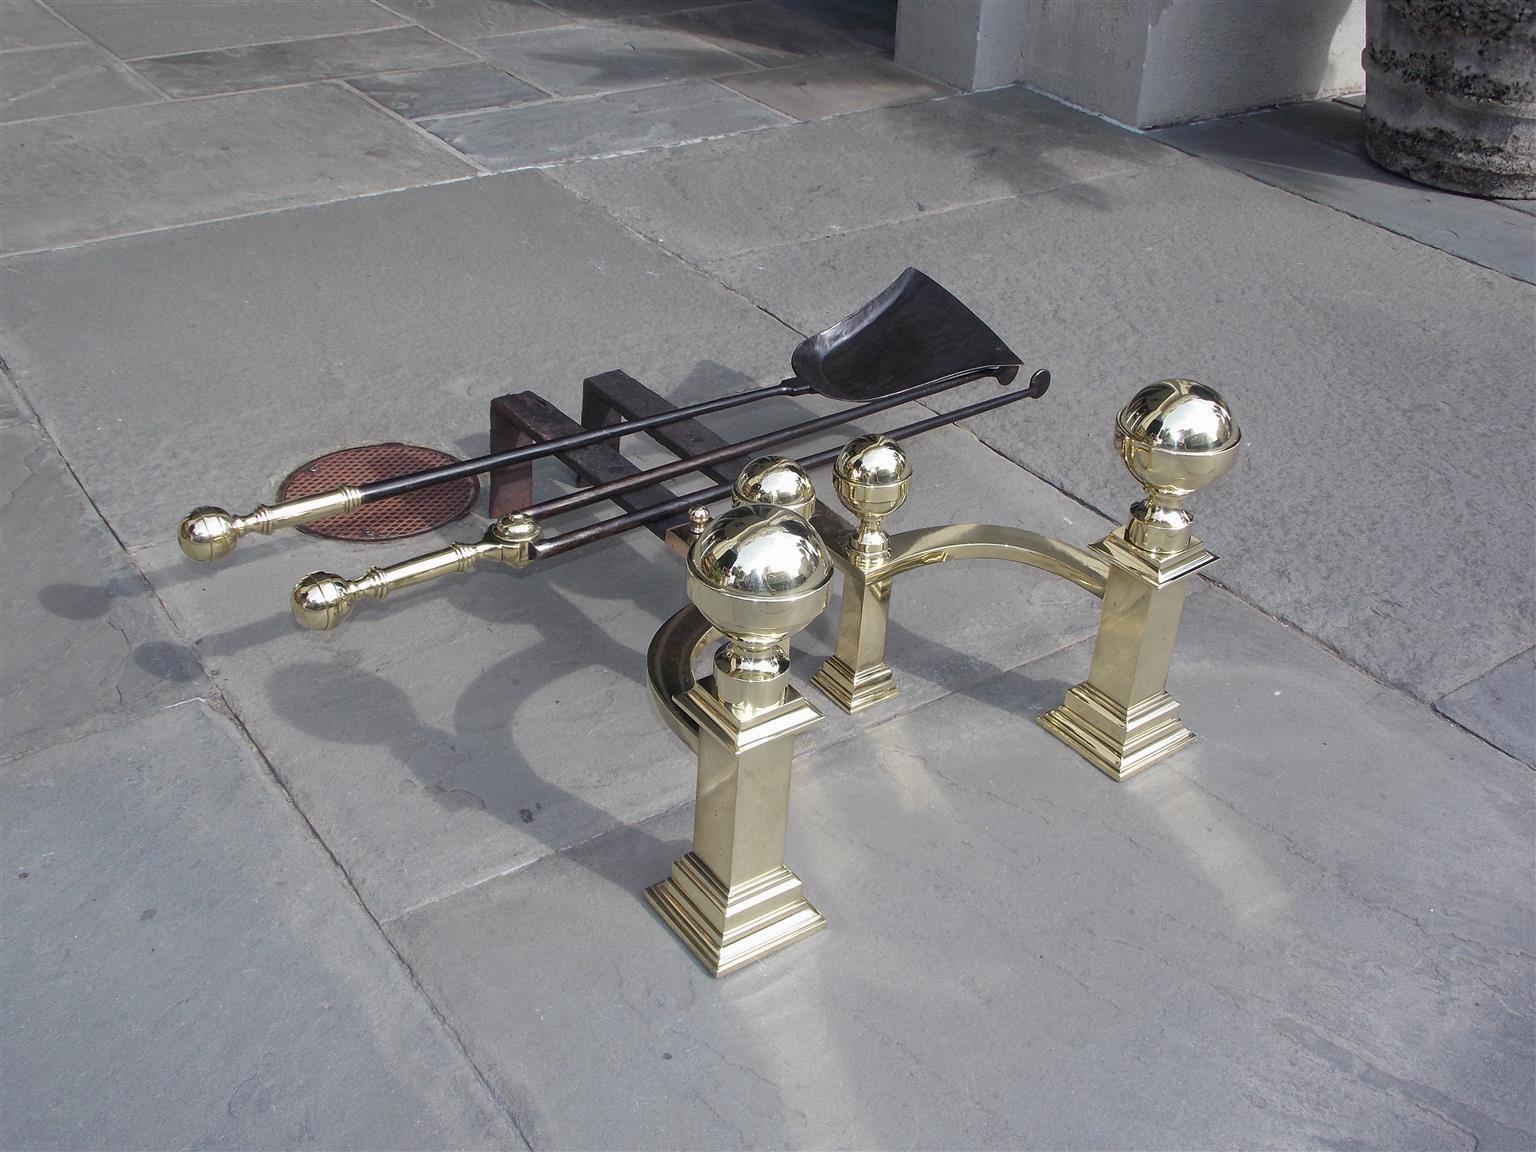 Pair of American brass banded ball top andirons with squared centered plinths, step back molded edge bases, curvature matching log stops, and the original wrought iron dog legs. Stamped by maker John Hunneman, Boston. Andirons have original matching